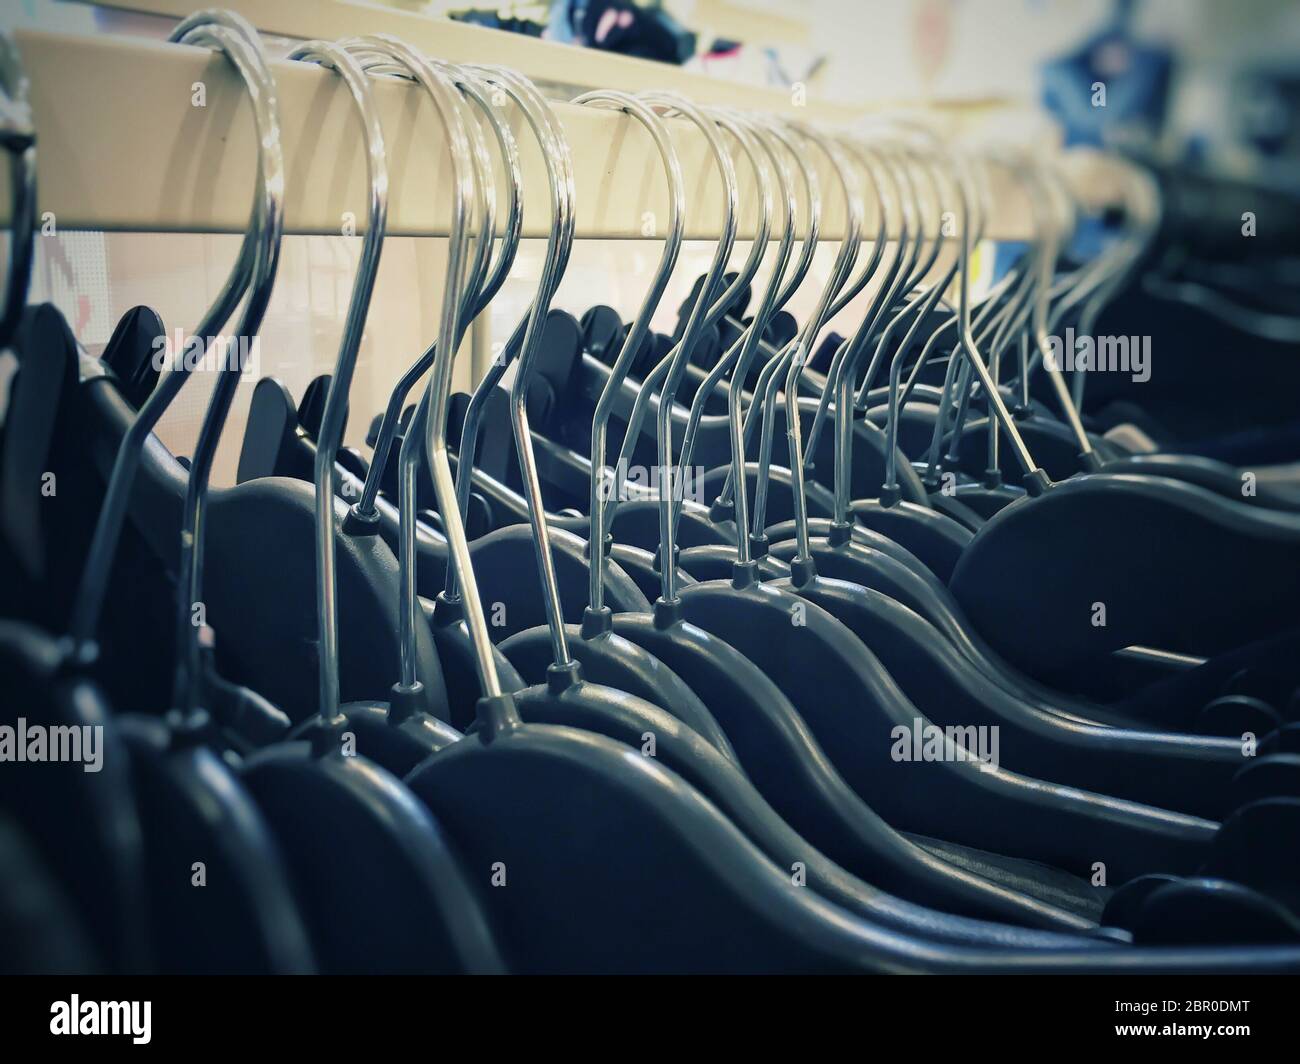 close-up view of a group of clothes hangers hanging in a row inside a shop Stock Photo